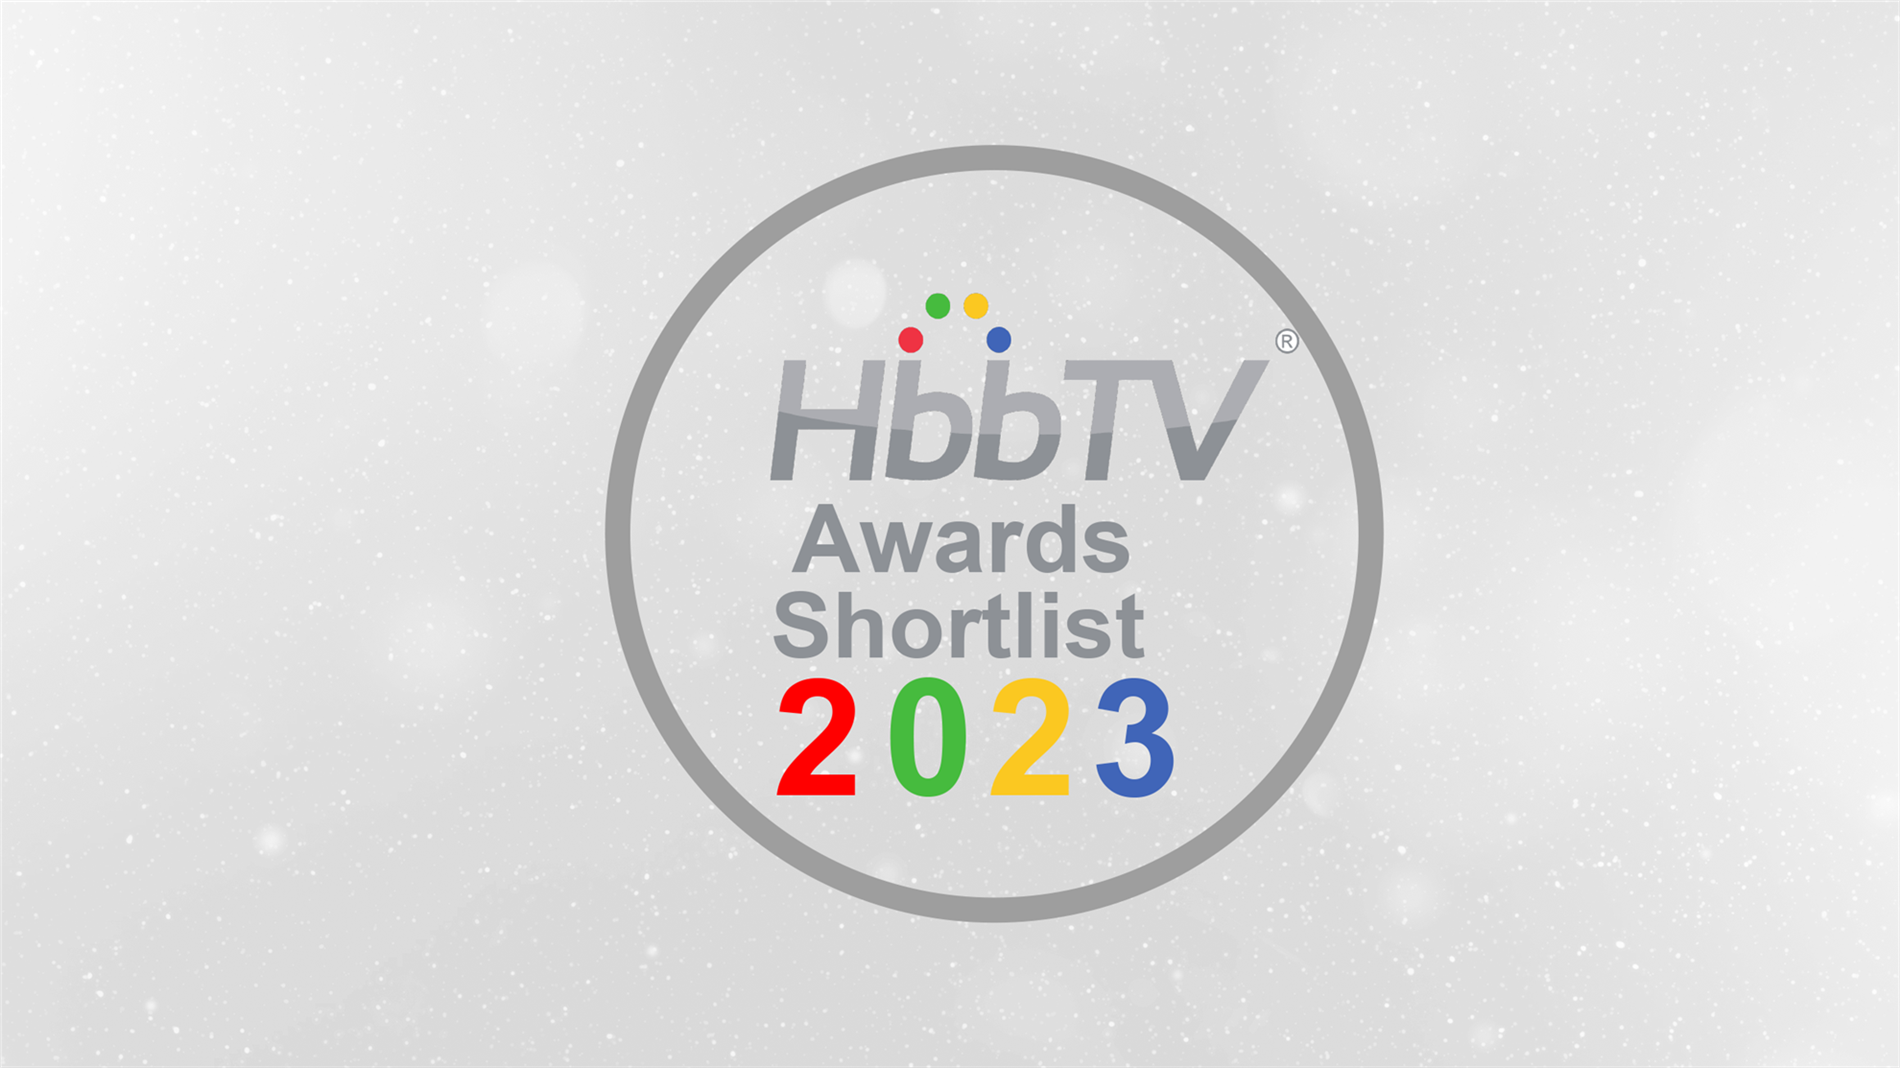 Fincons shortlisted for the HbbTV Awards 2023